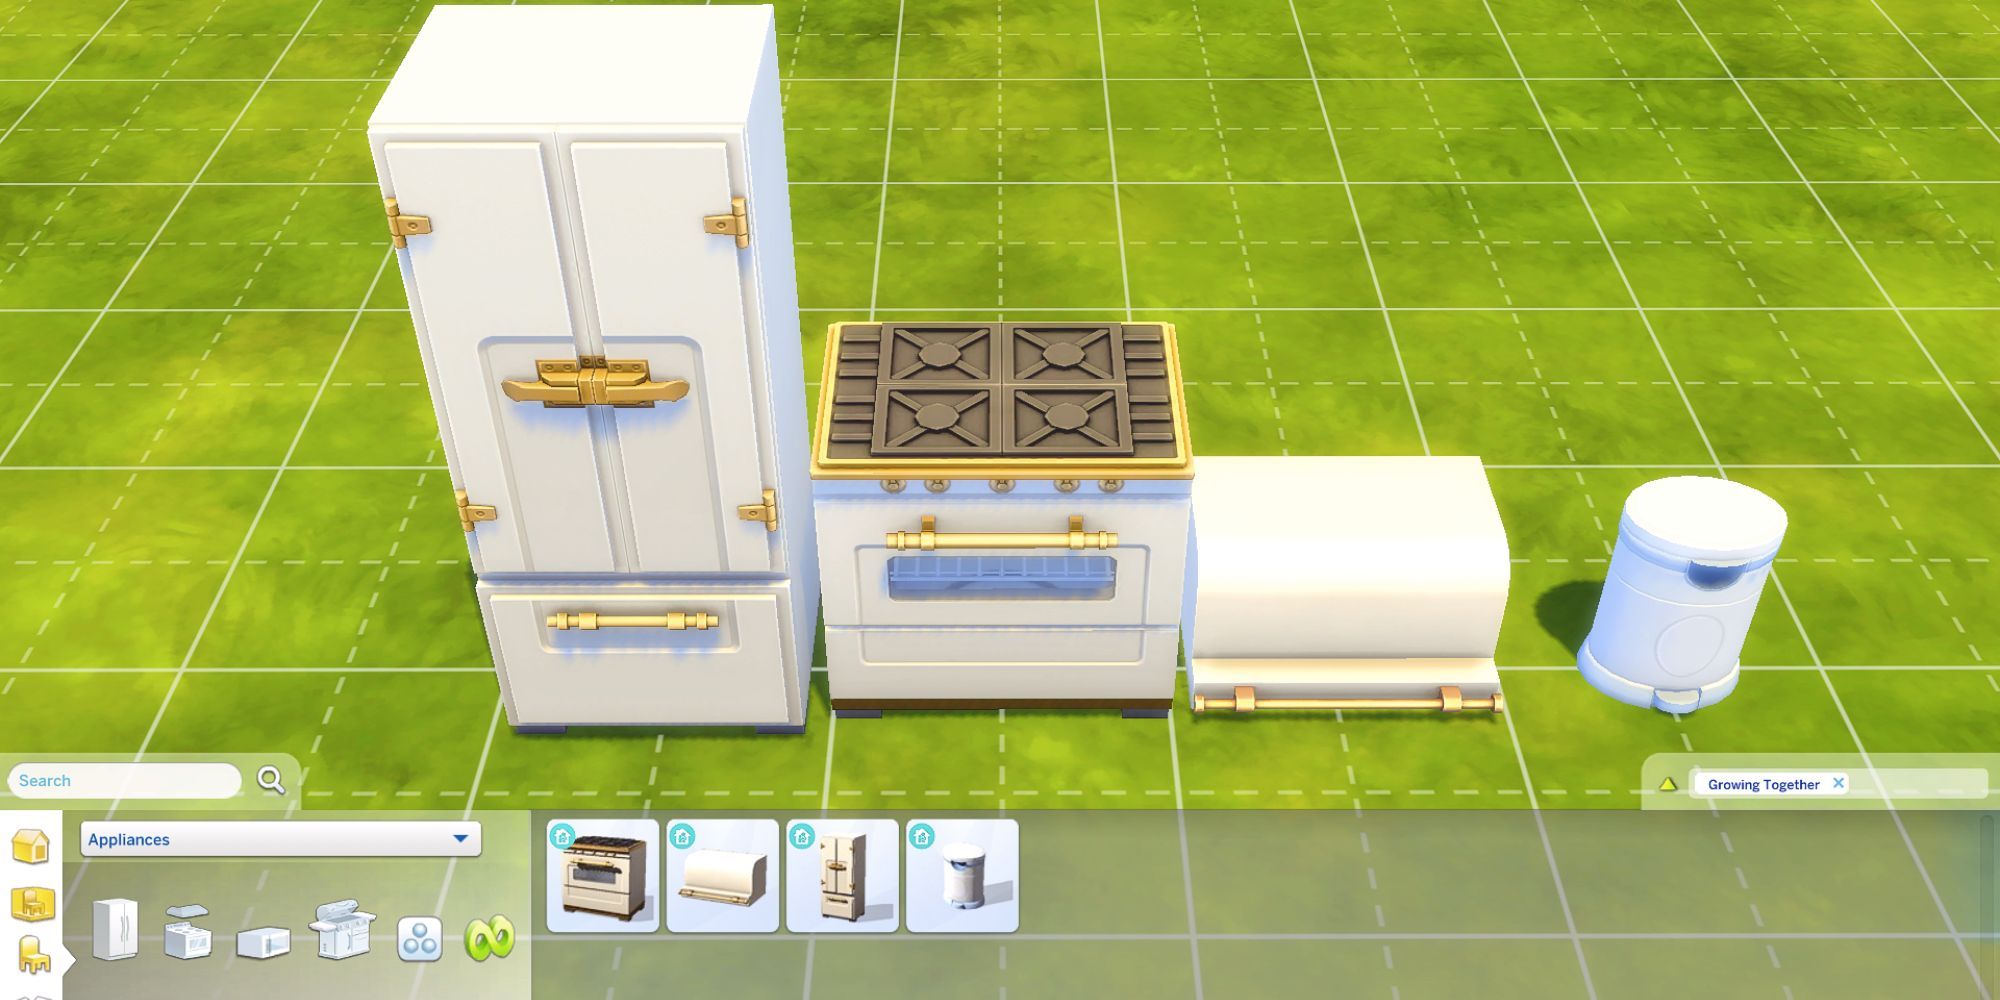 The Sims 4 Grow Together Devices